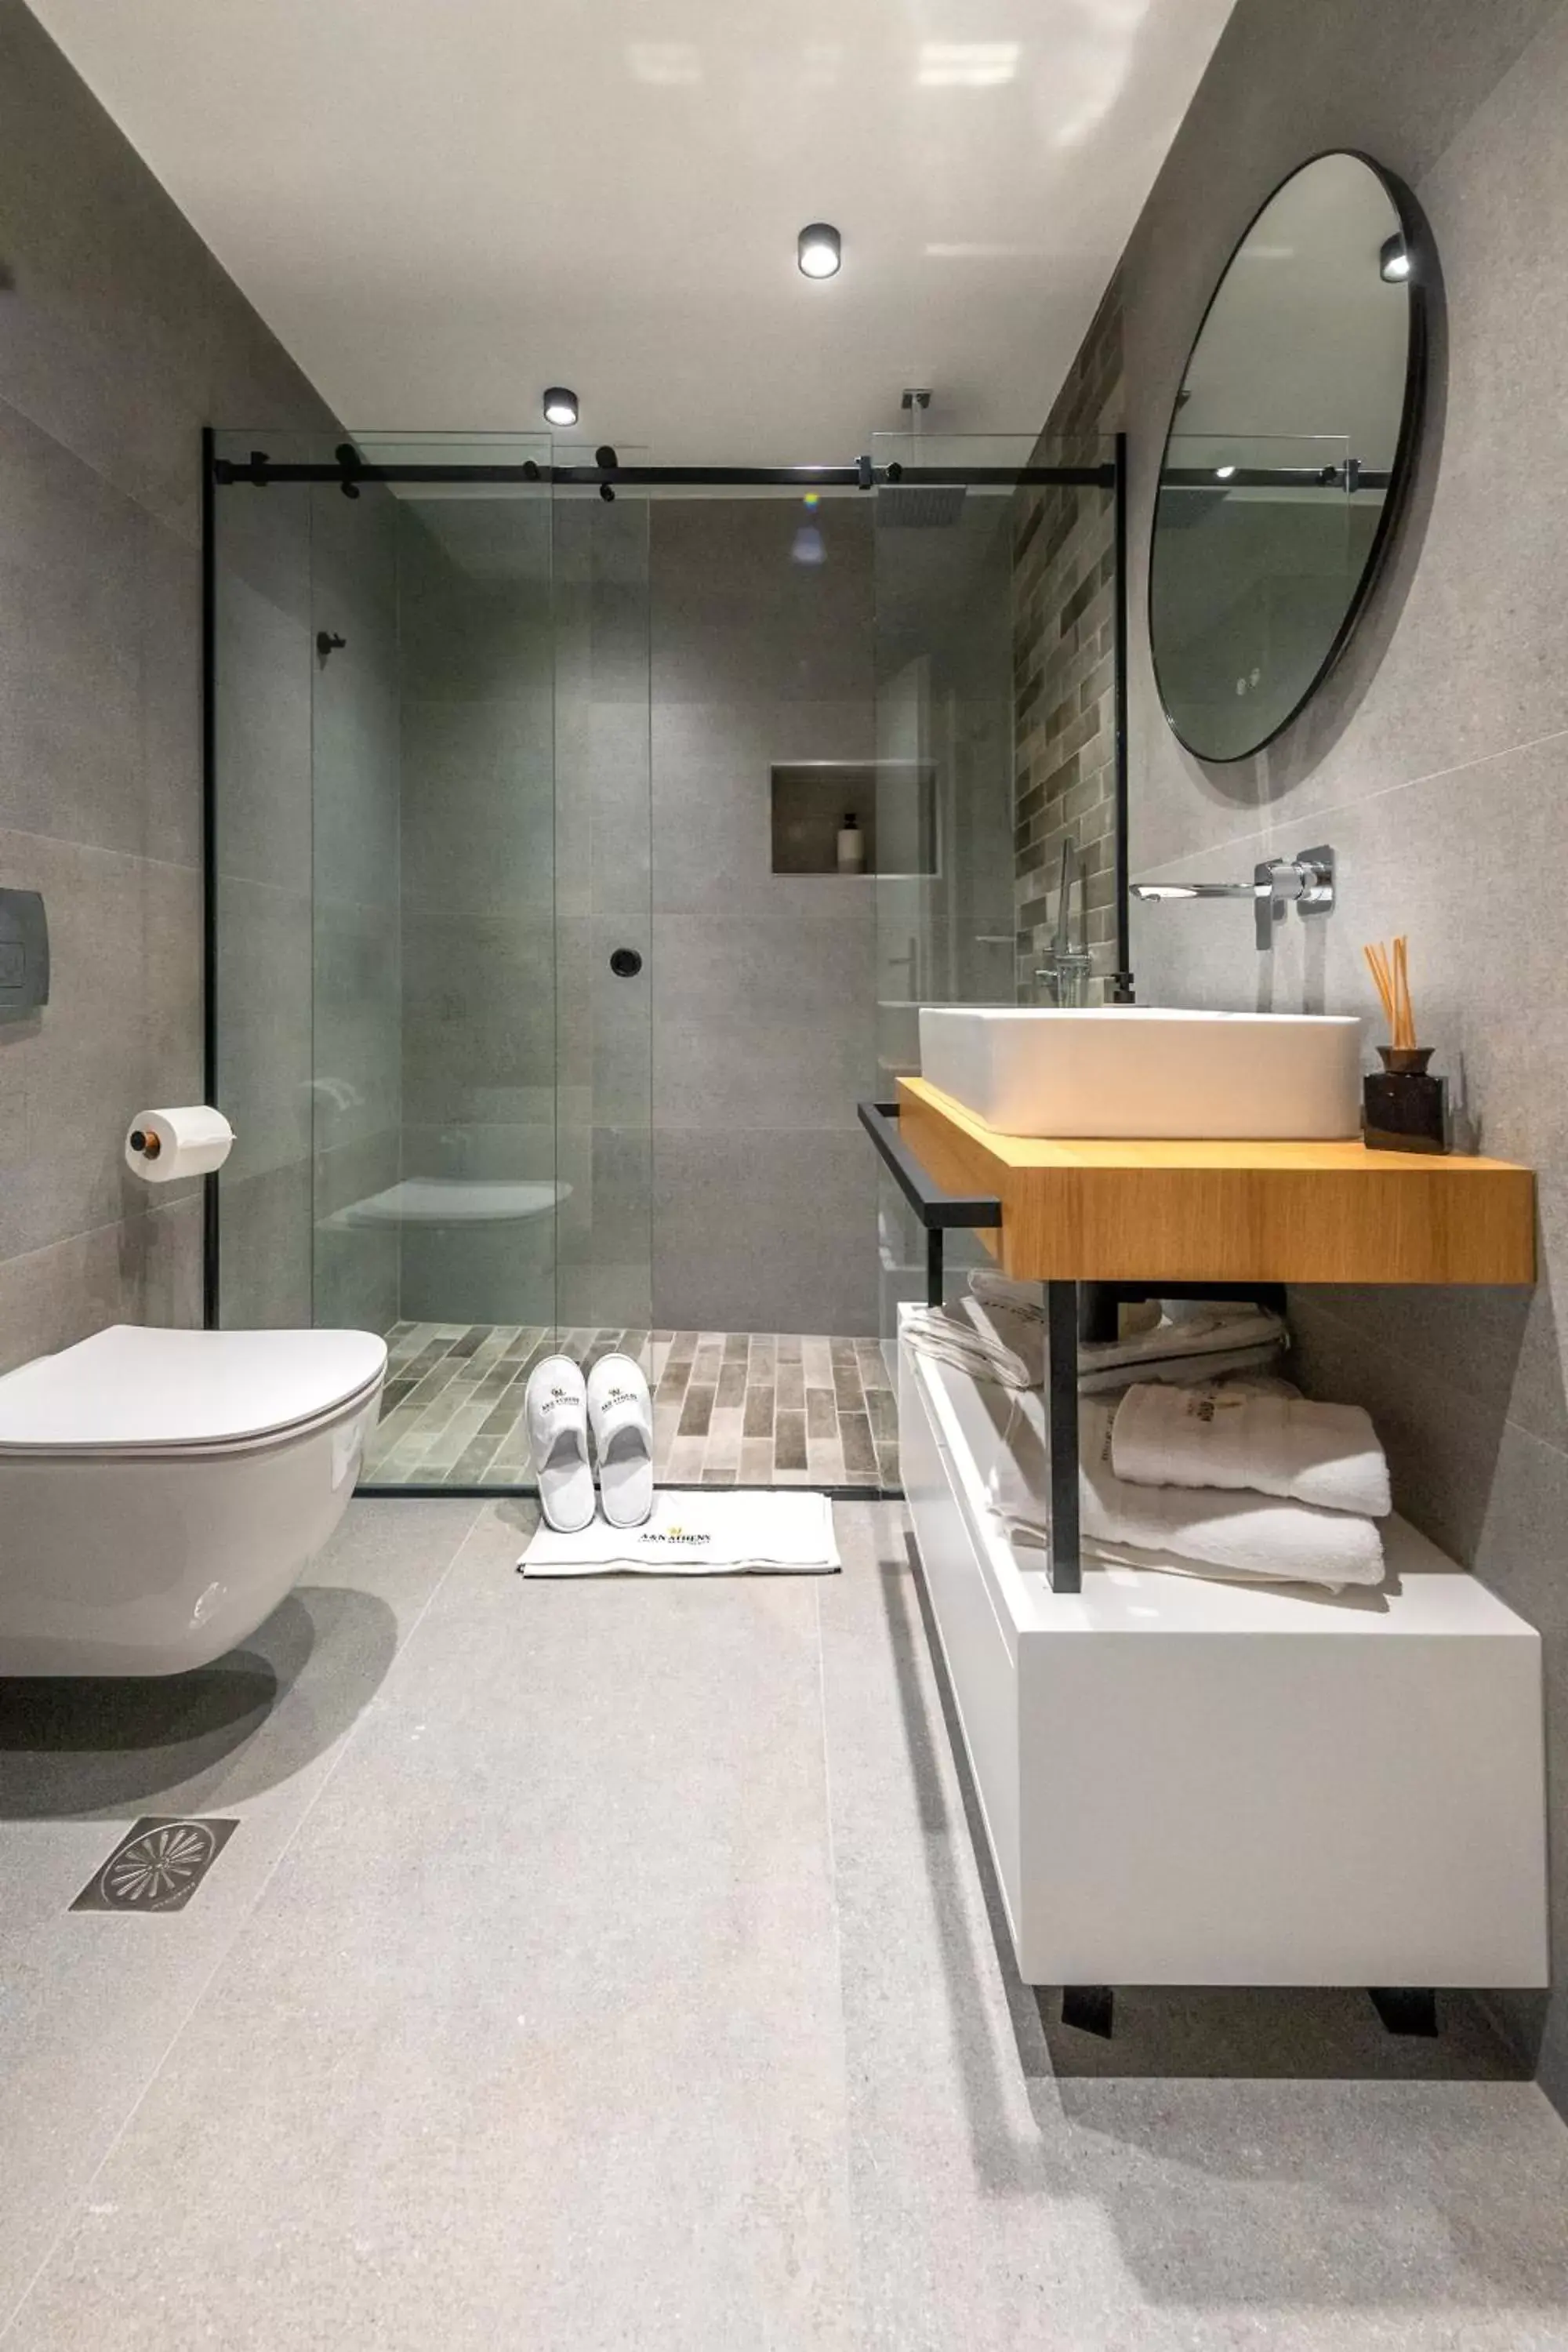 Bathroom in A&N Athens Luxury Apartments - Ermou